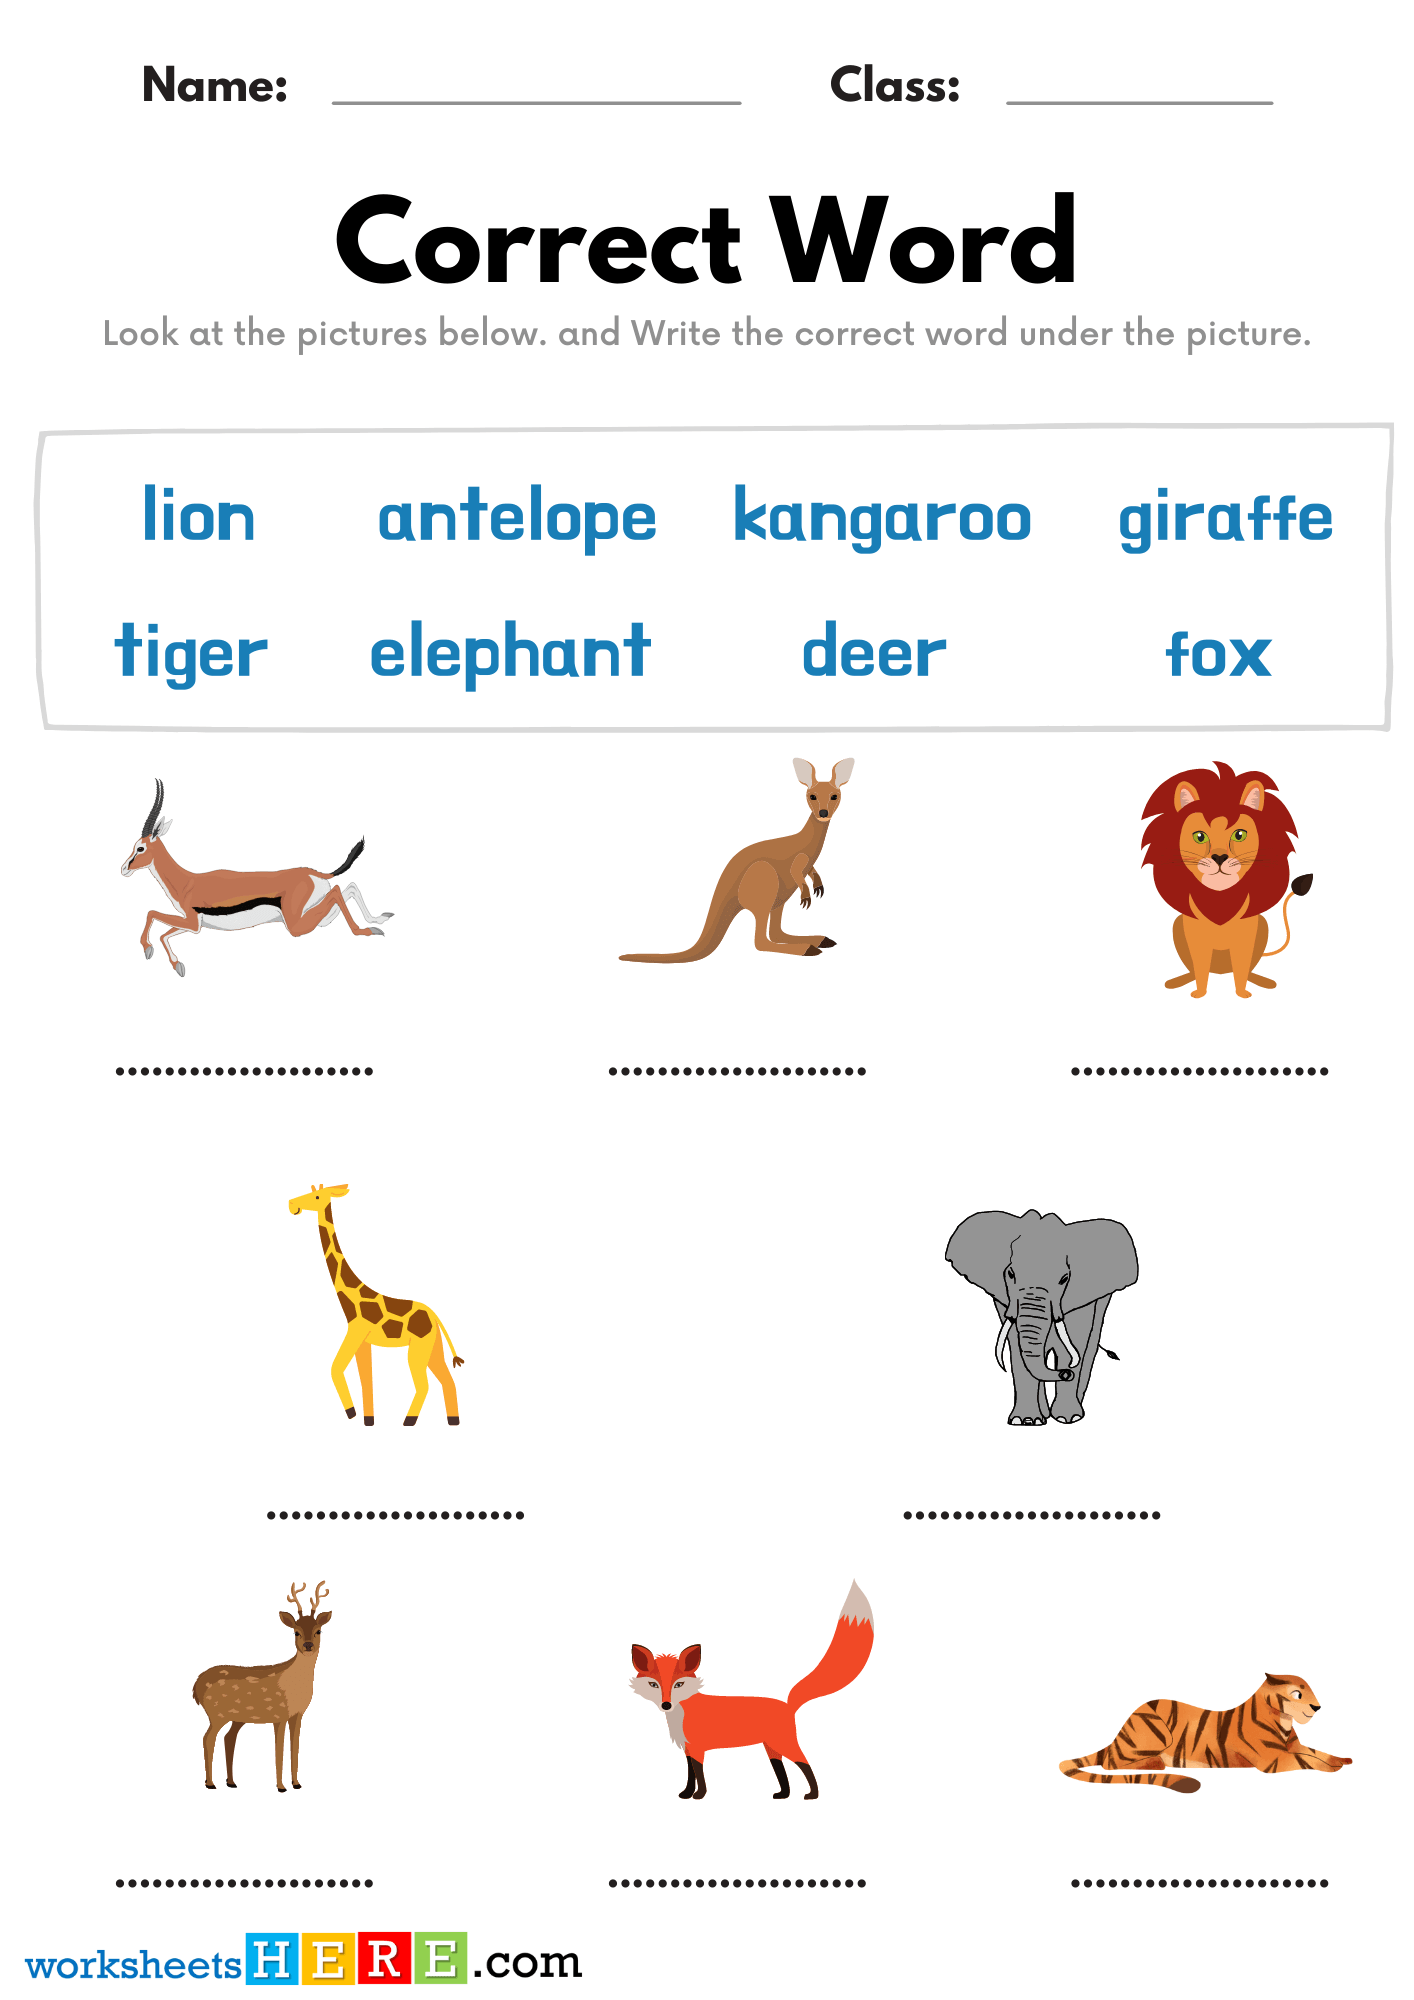 Matching Correct Words With Animals Names Pictures PDF Worksheets For Kids